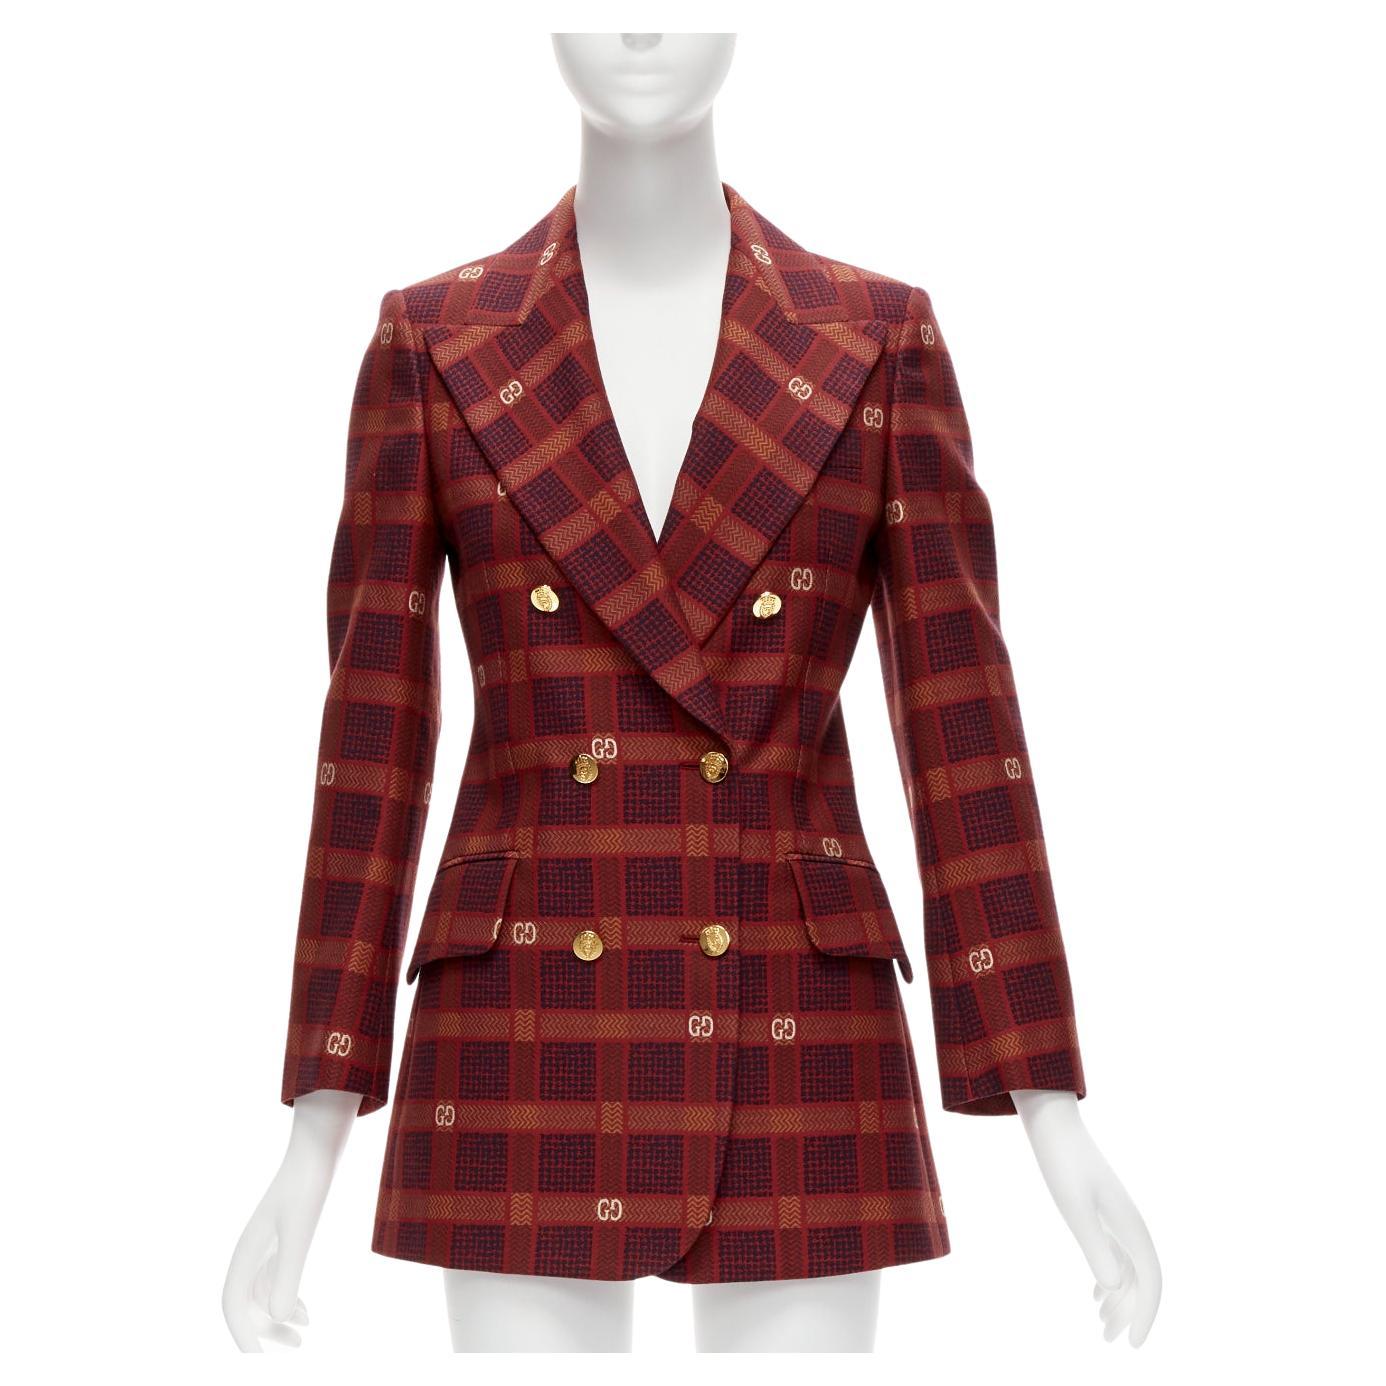 GUCCI Garden Alessandro Michele red GG logo plaid double breasted blazer IT38 XS For Sale